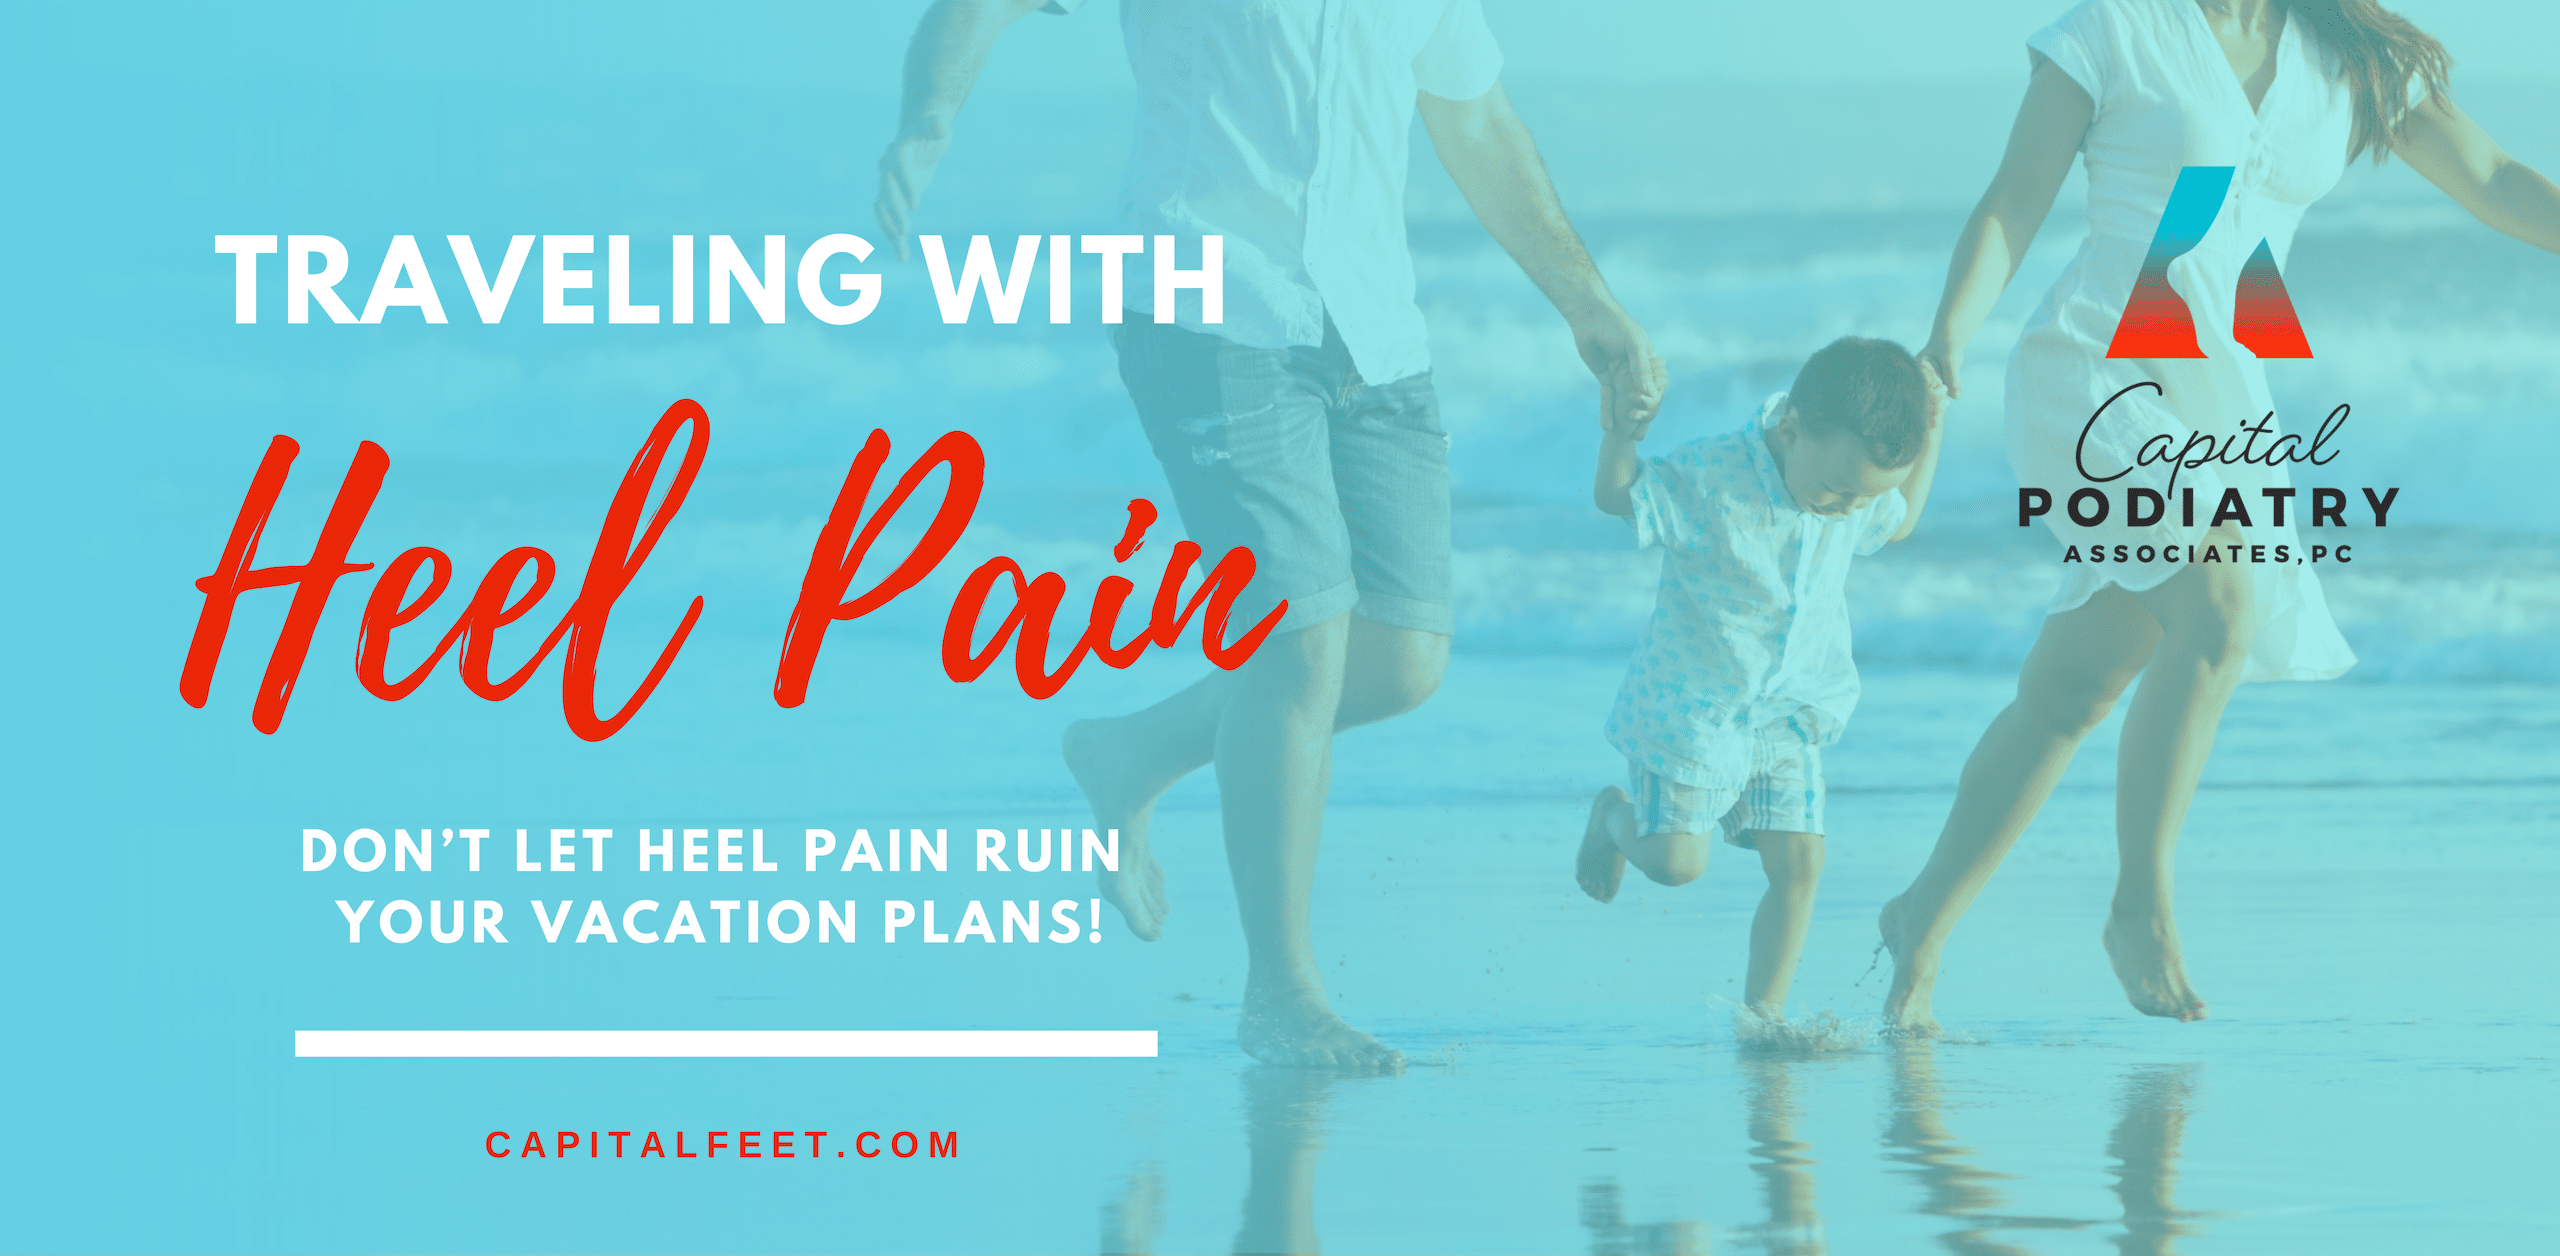 Traveling With Heel Pain